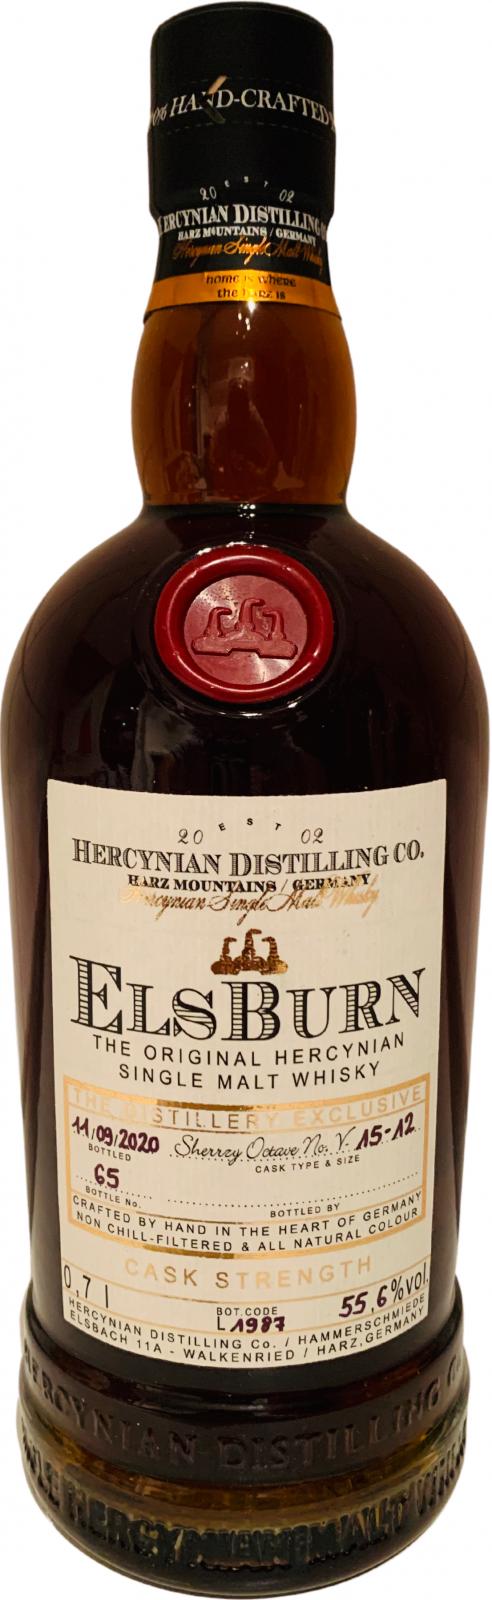 ElsBurn 2015 The Distillery Exclusive Sherry Octave V-15-12 55.6% 700ml